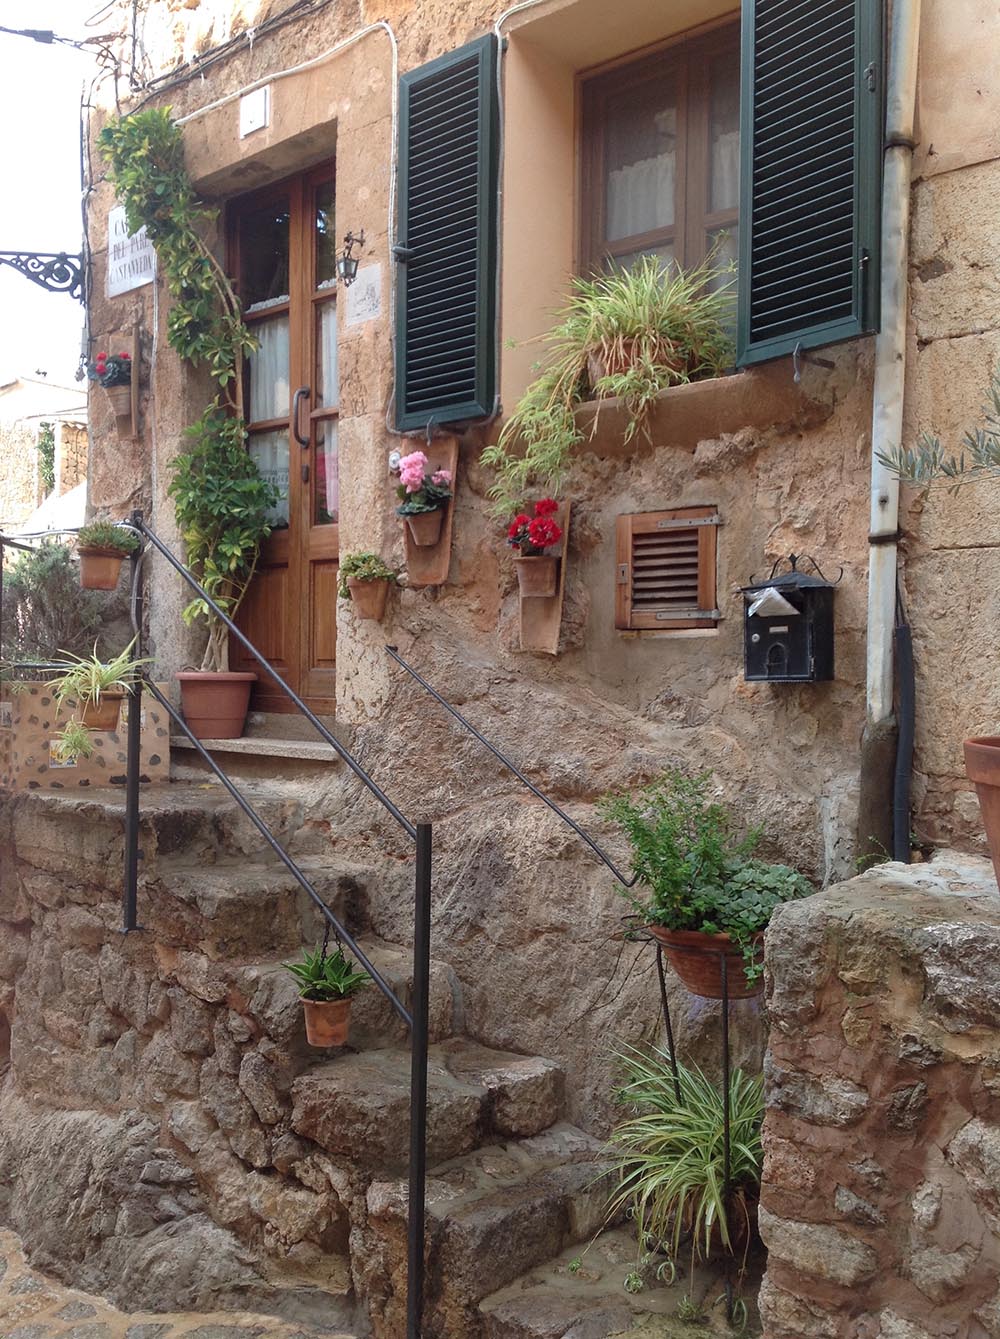 Typical hanging flowers from homes in Valldemossa